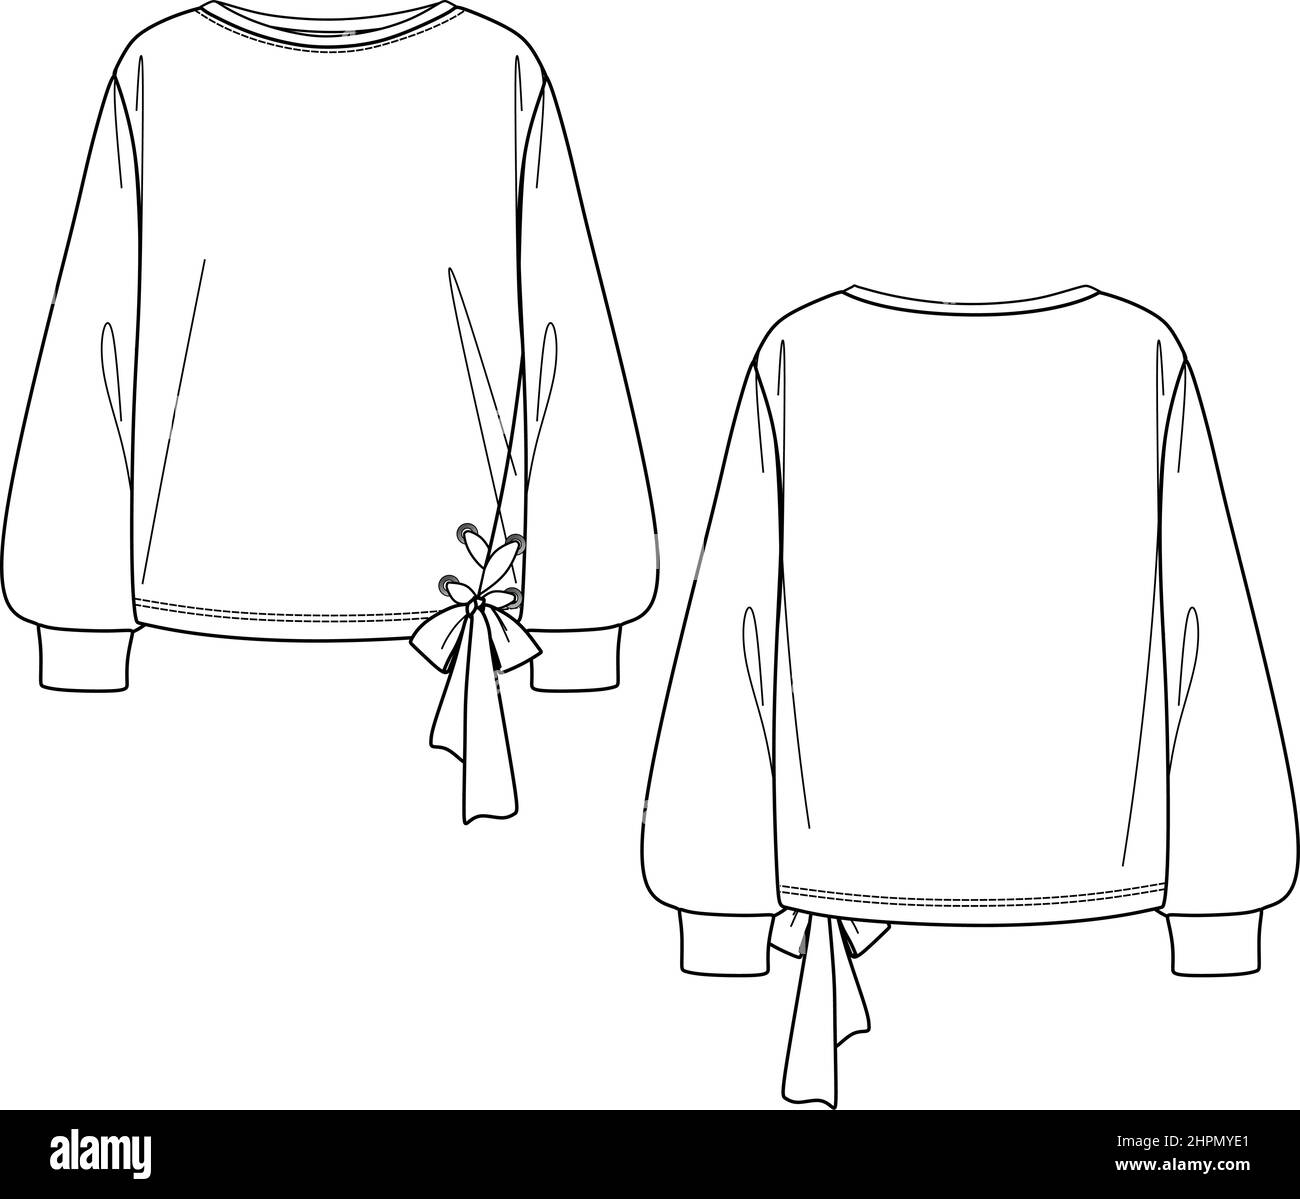 Vector fashion sketch sweatshirt with bow, women sweatshirt technical drawing, fashion CAD long sleeved top with gathering detail Stock Vector